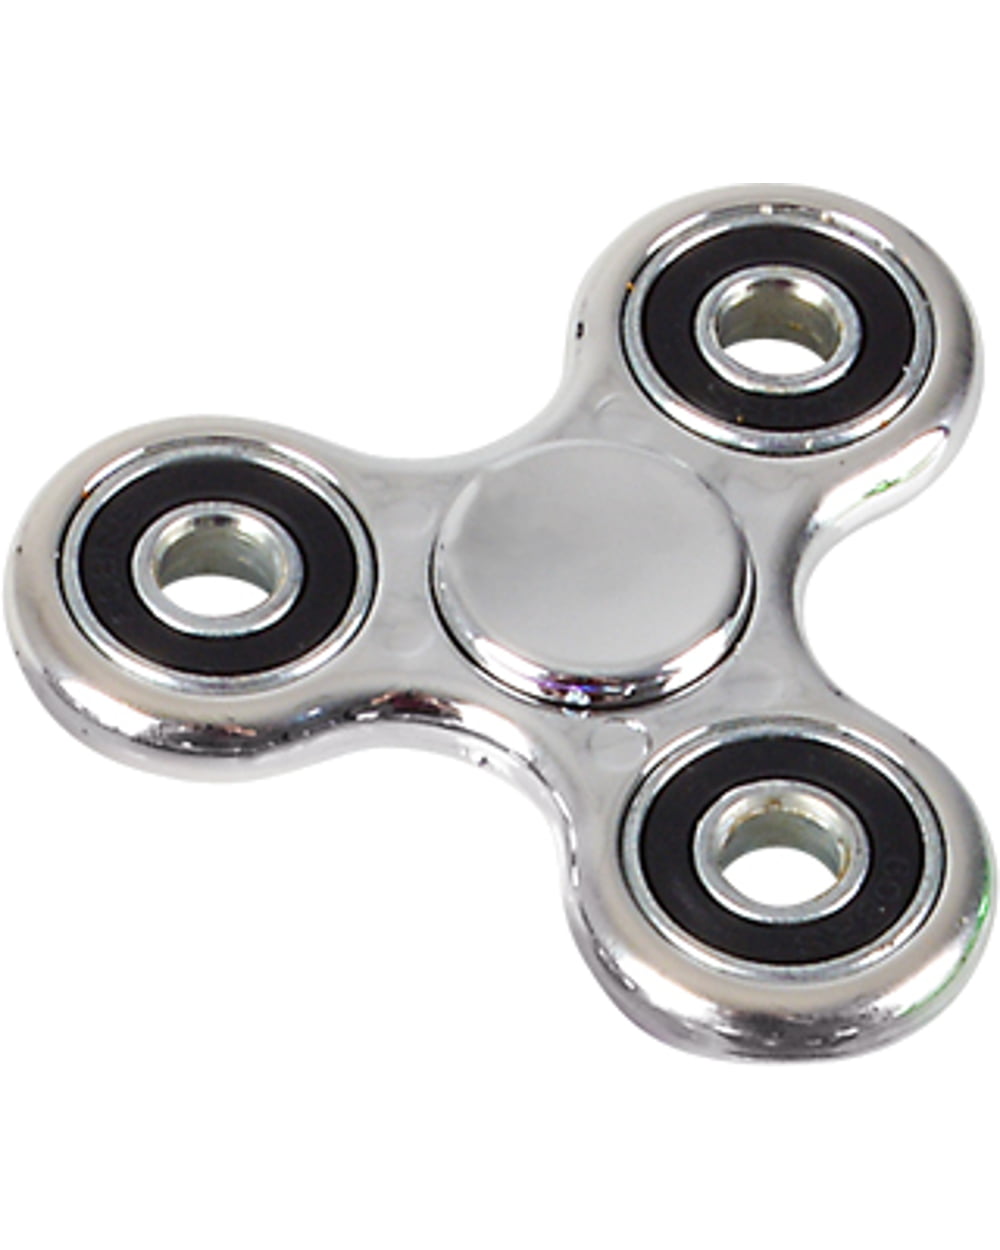 Brand New Boxed Metal Fidget Spinner/Silver And Crystal Kids Fun Toys 